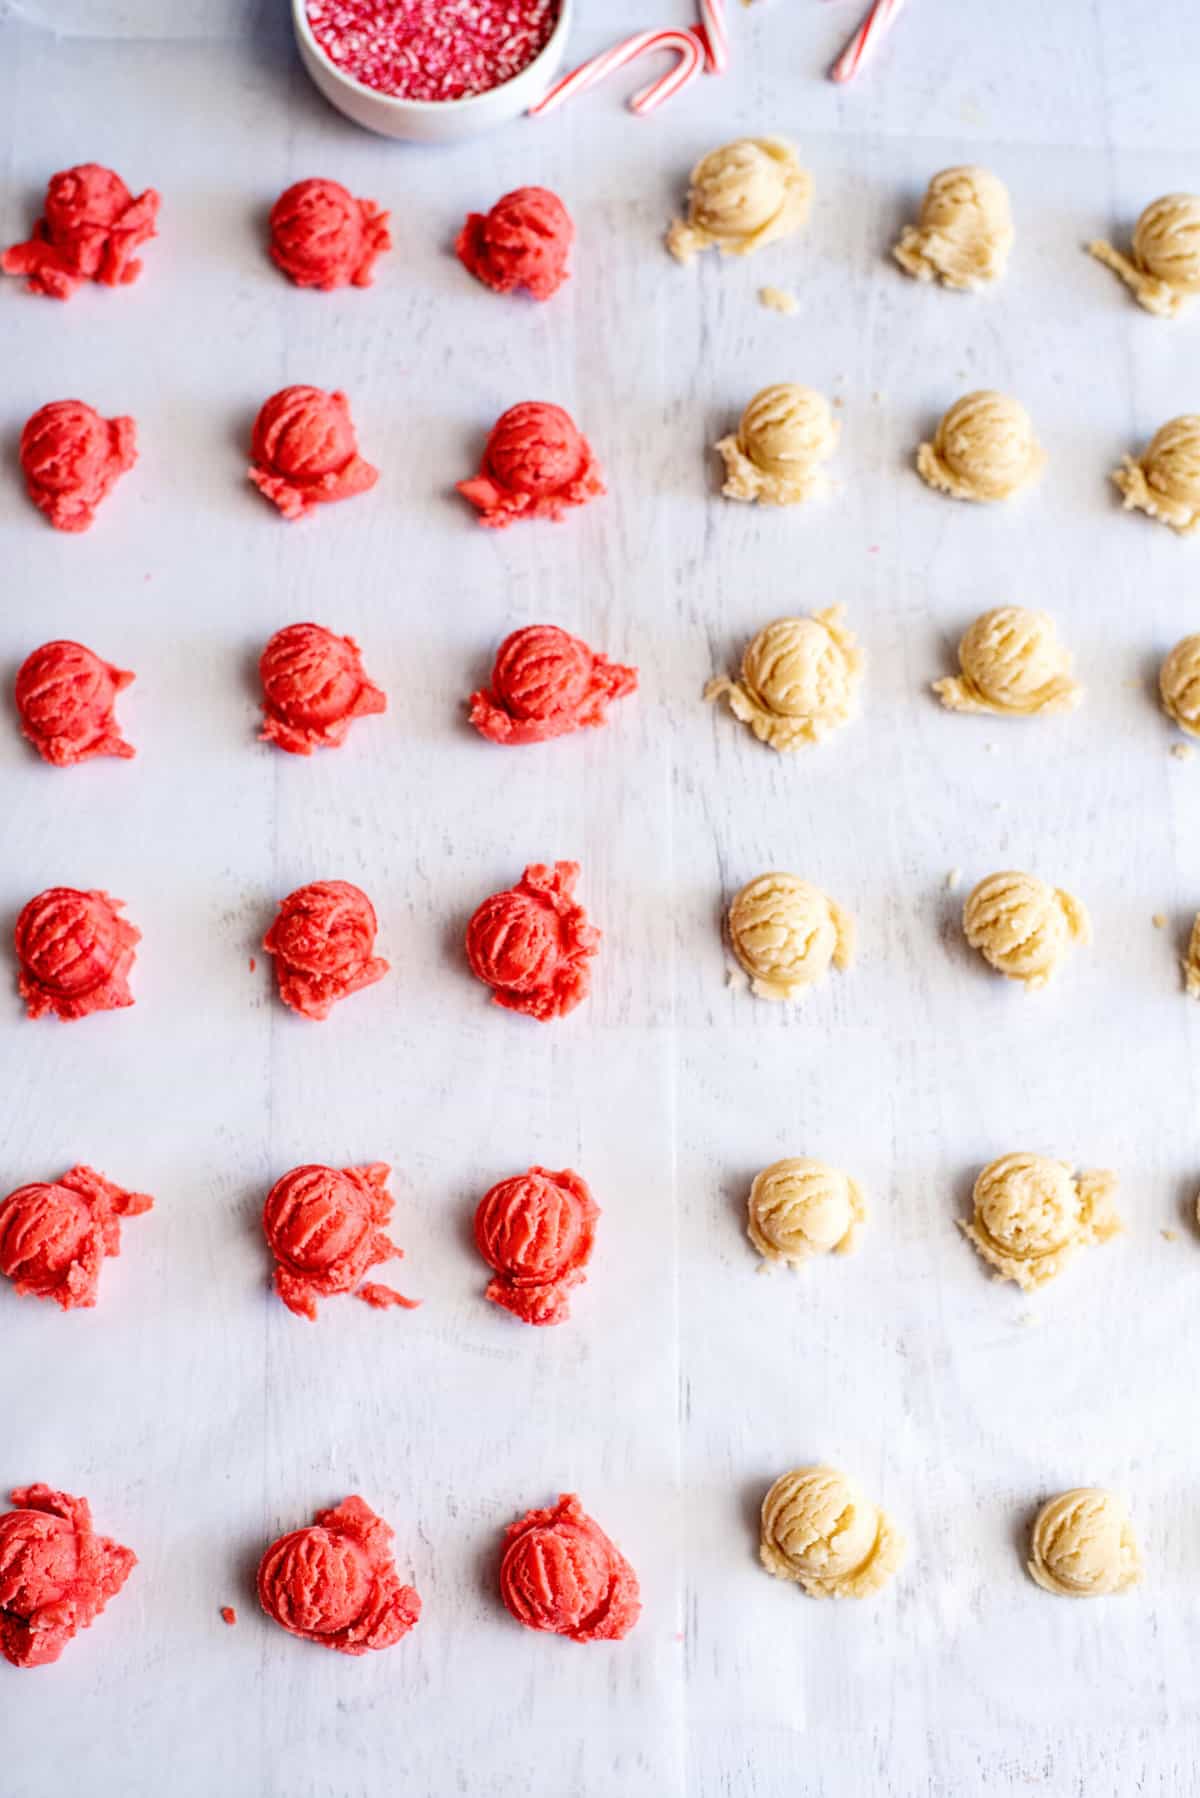 scoop candy cane cookie dough into one teaspoon portions